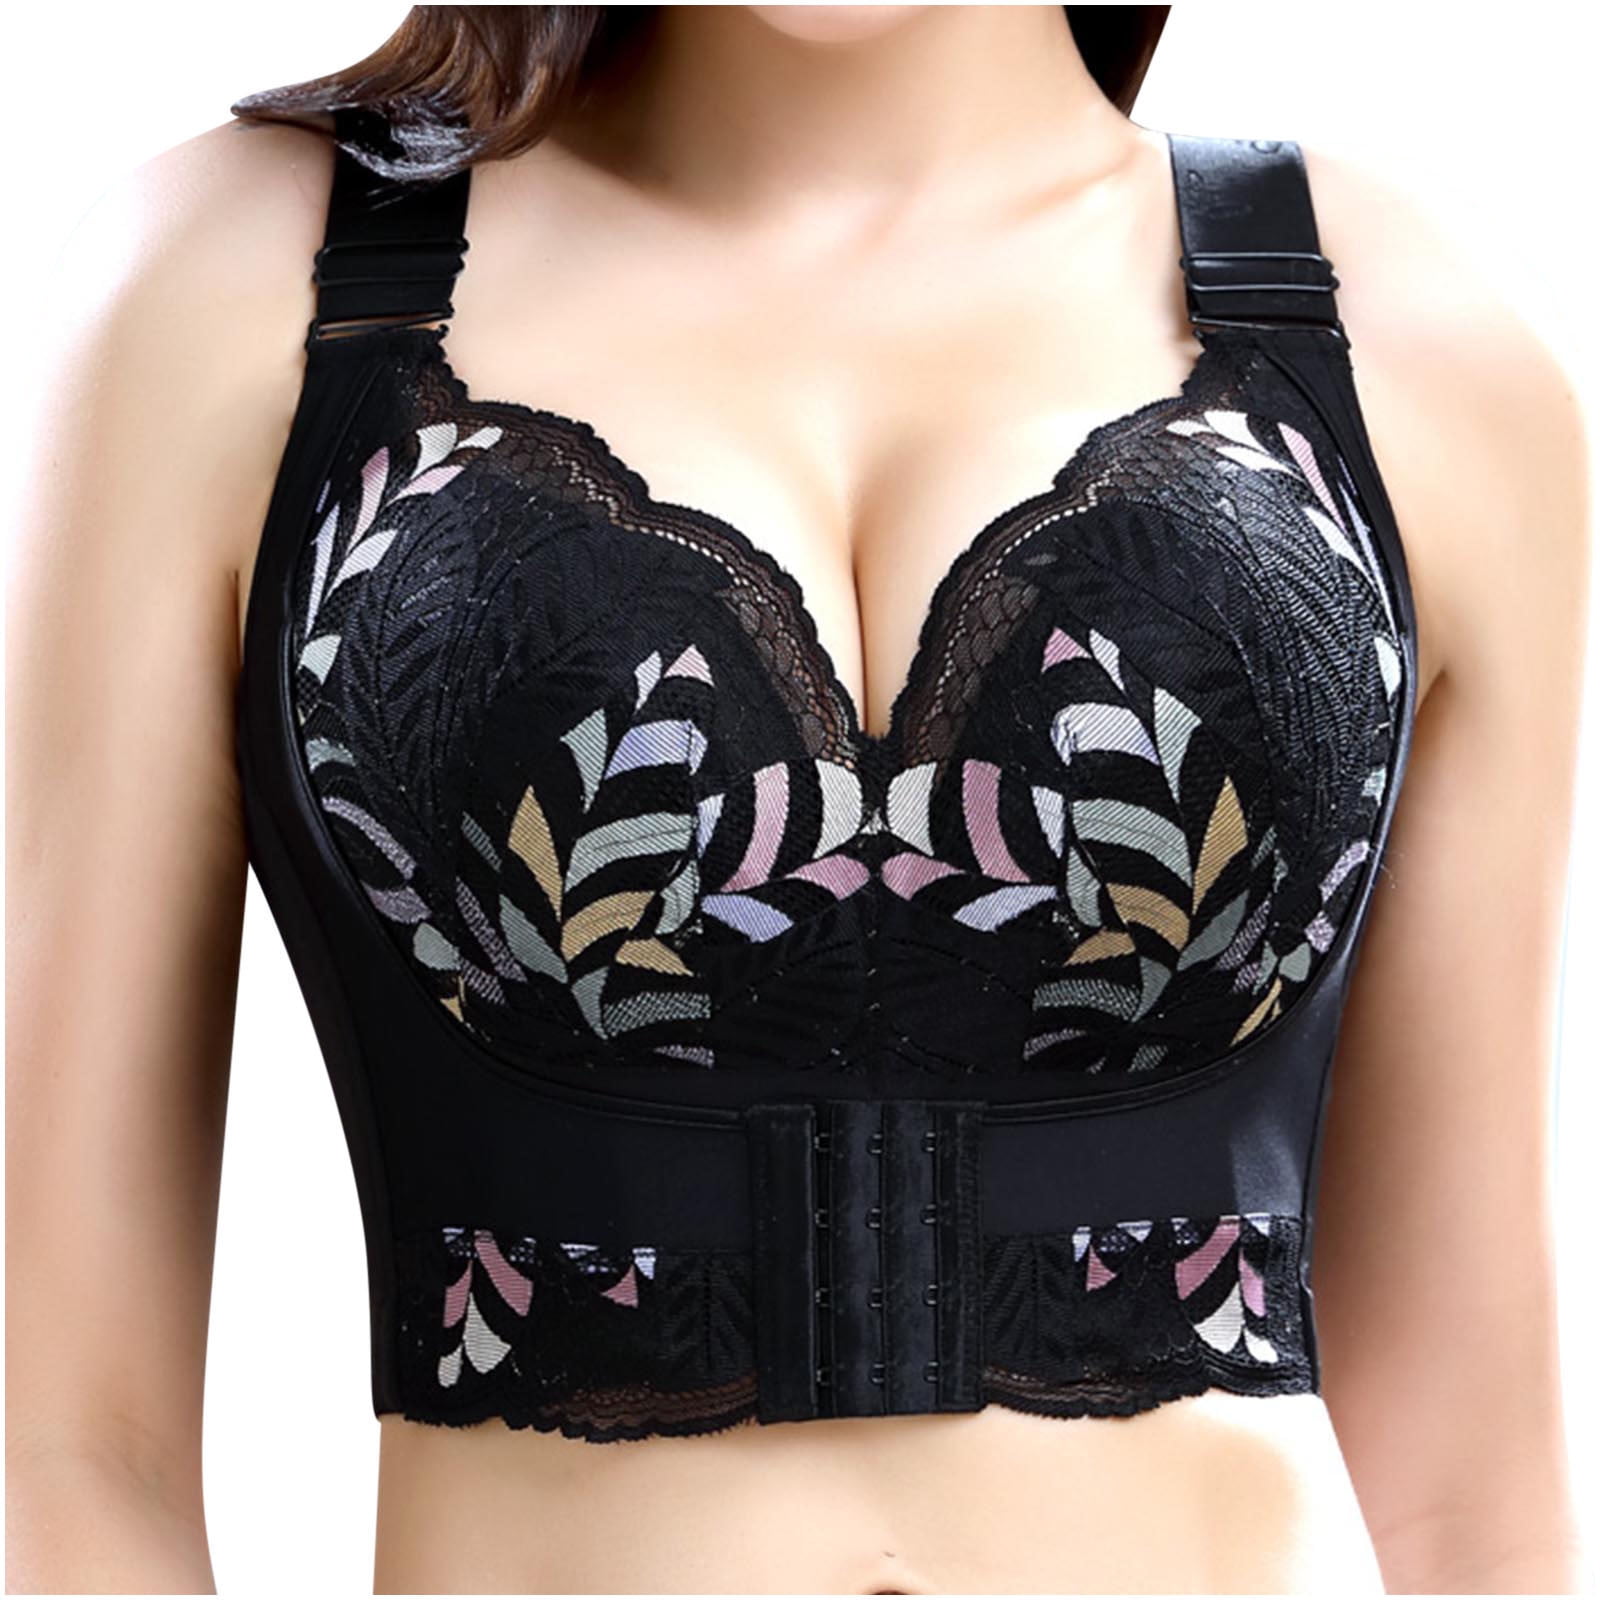 Qiaocaity Women Bras High Support Underwear Thin Large Size No